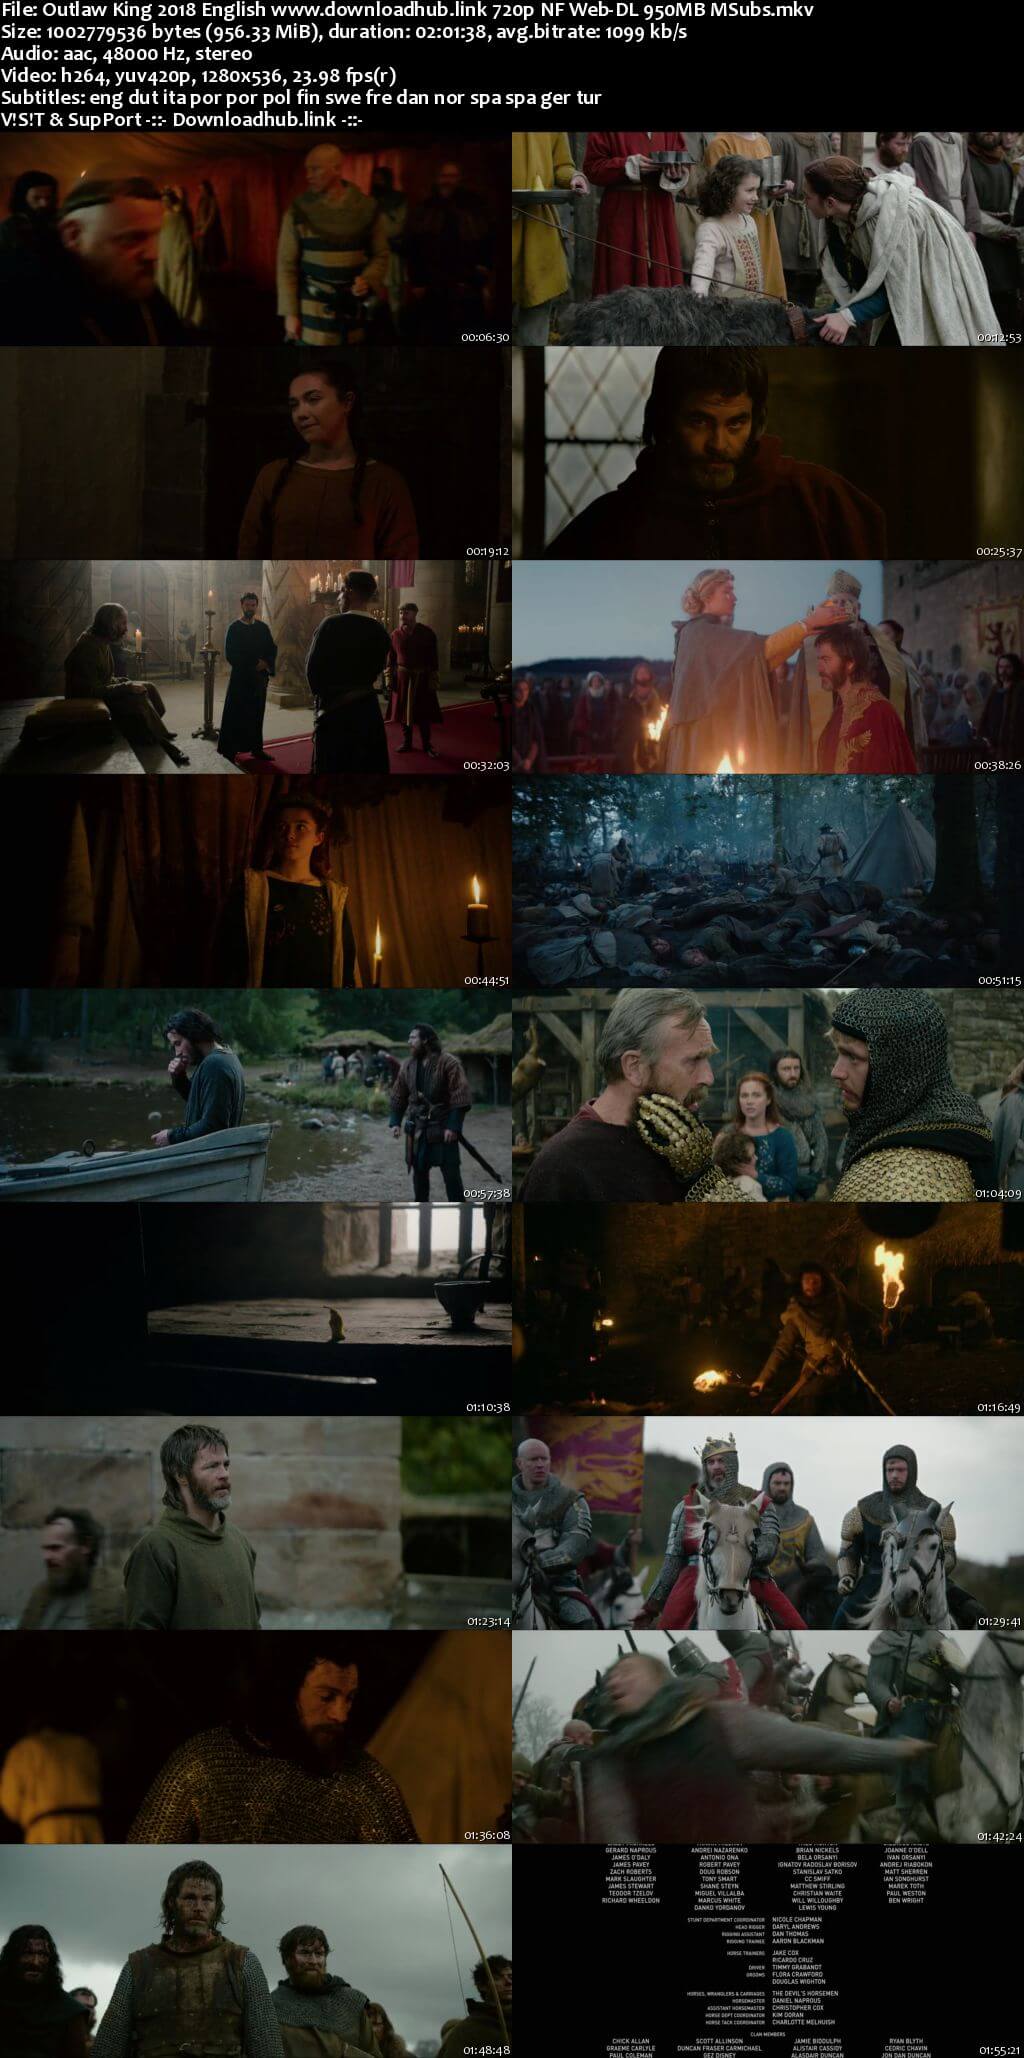 Outlaw King 2018 English 720p NF Web-DL 950MB MSubs